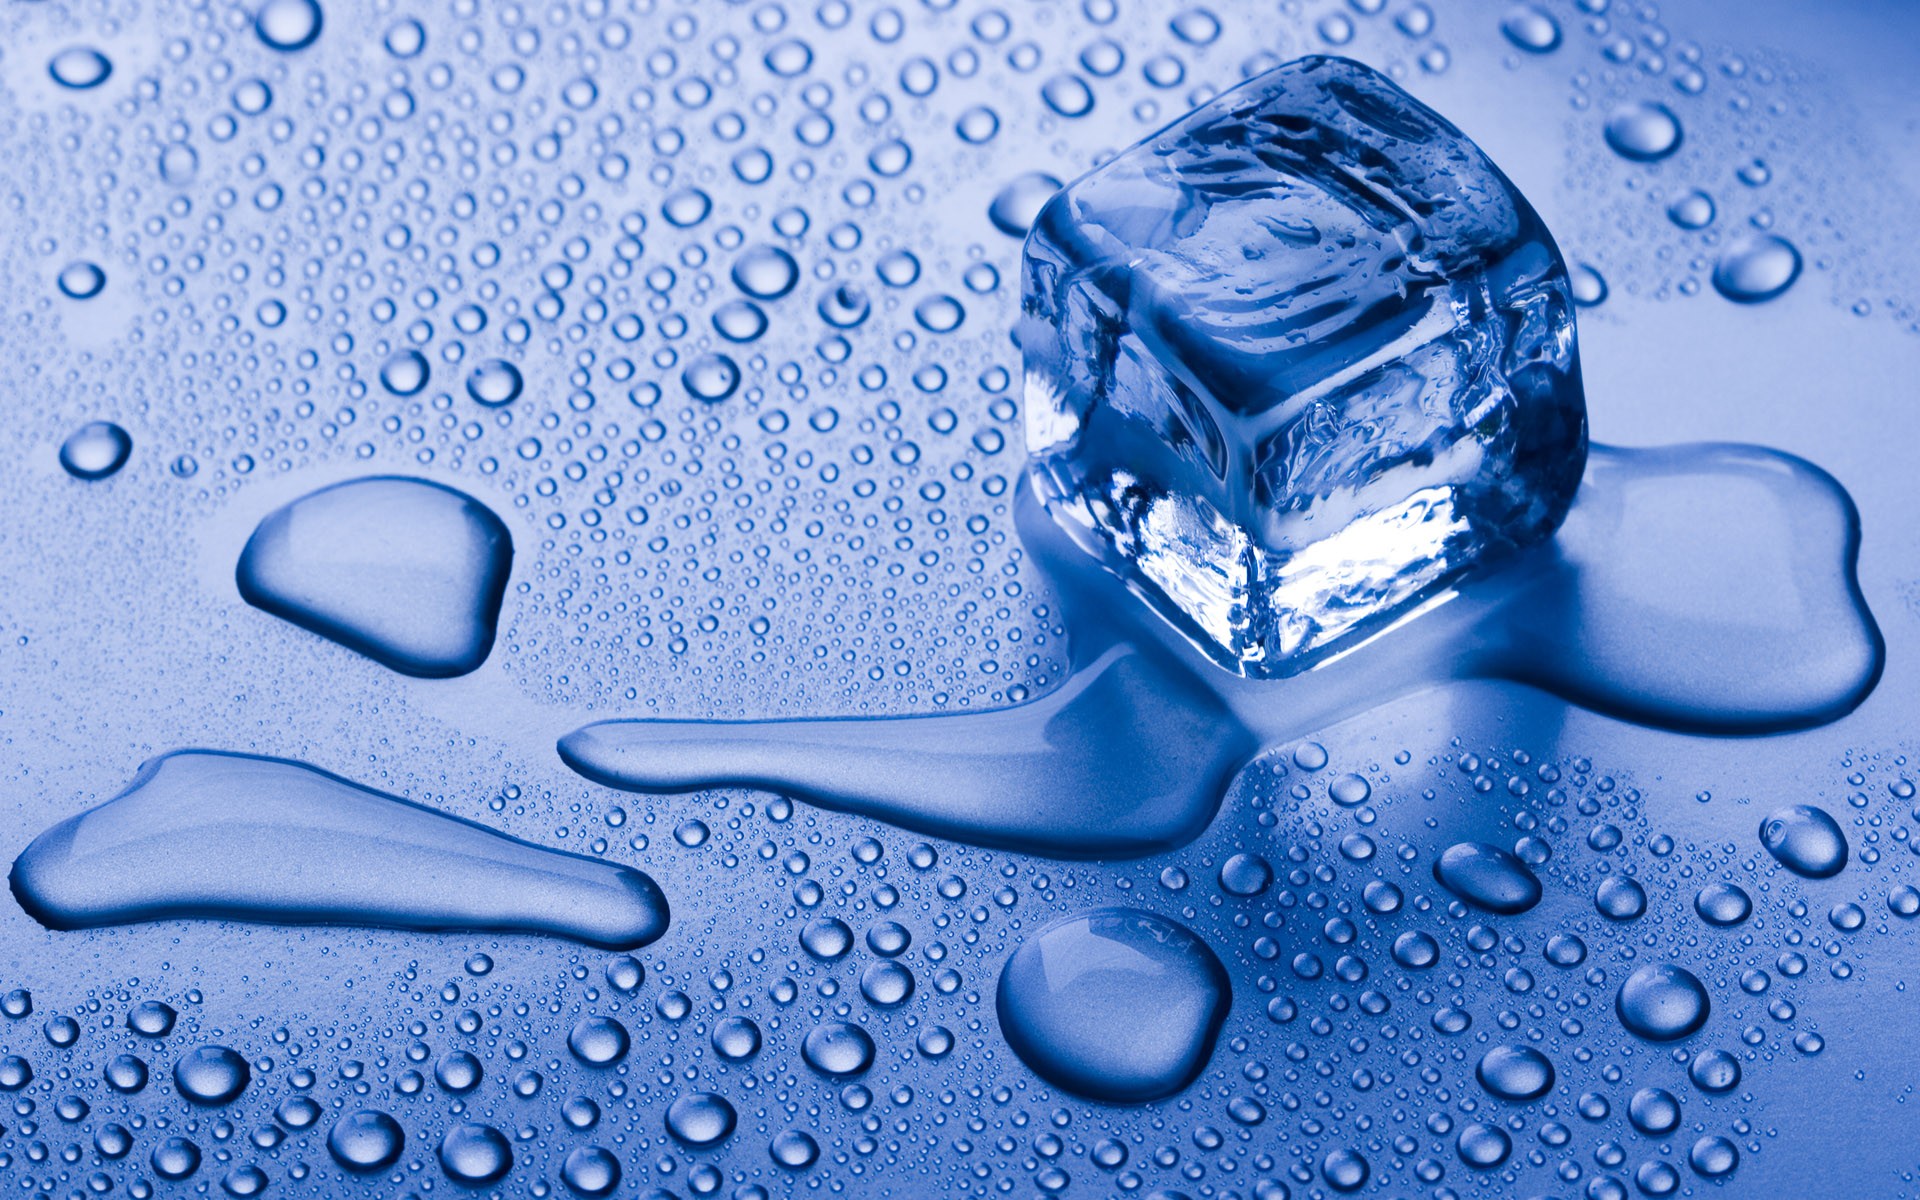 Melting Ice Cubes Wallpaper Images amp Pictures   Becuo 1920x1200